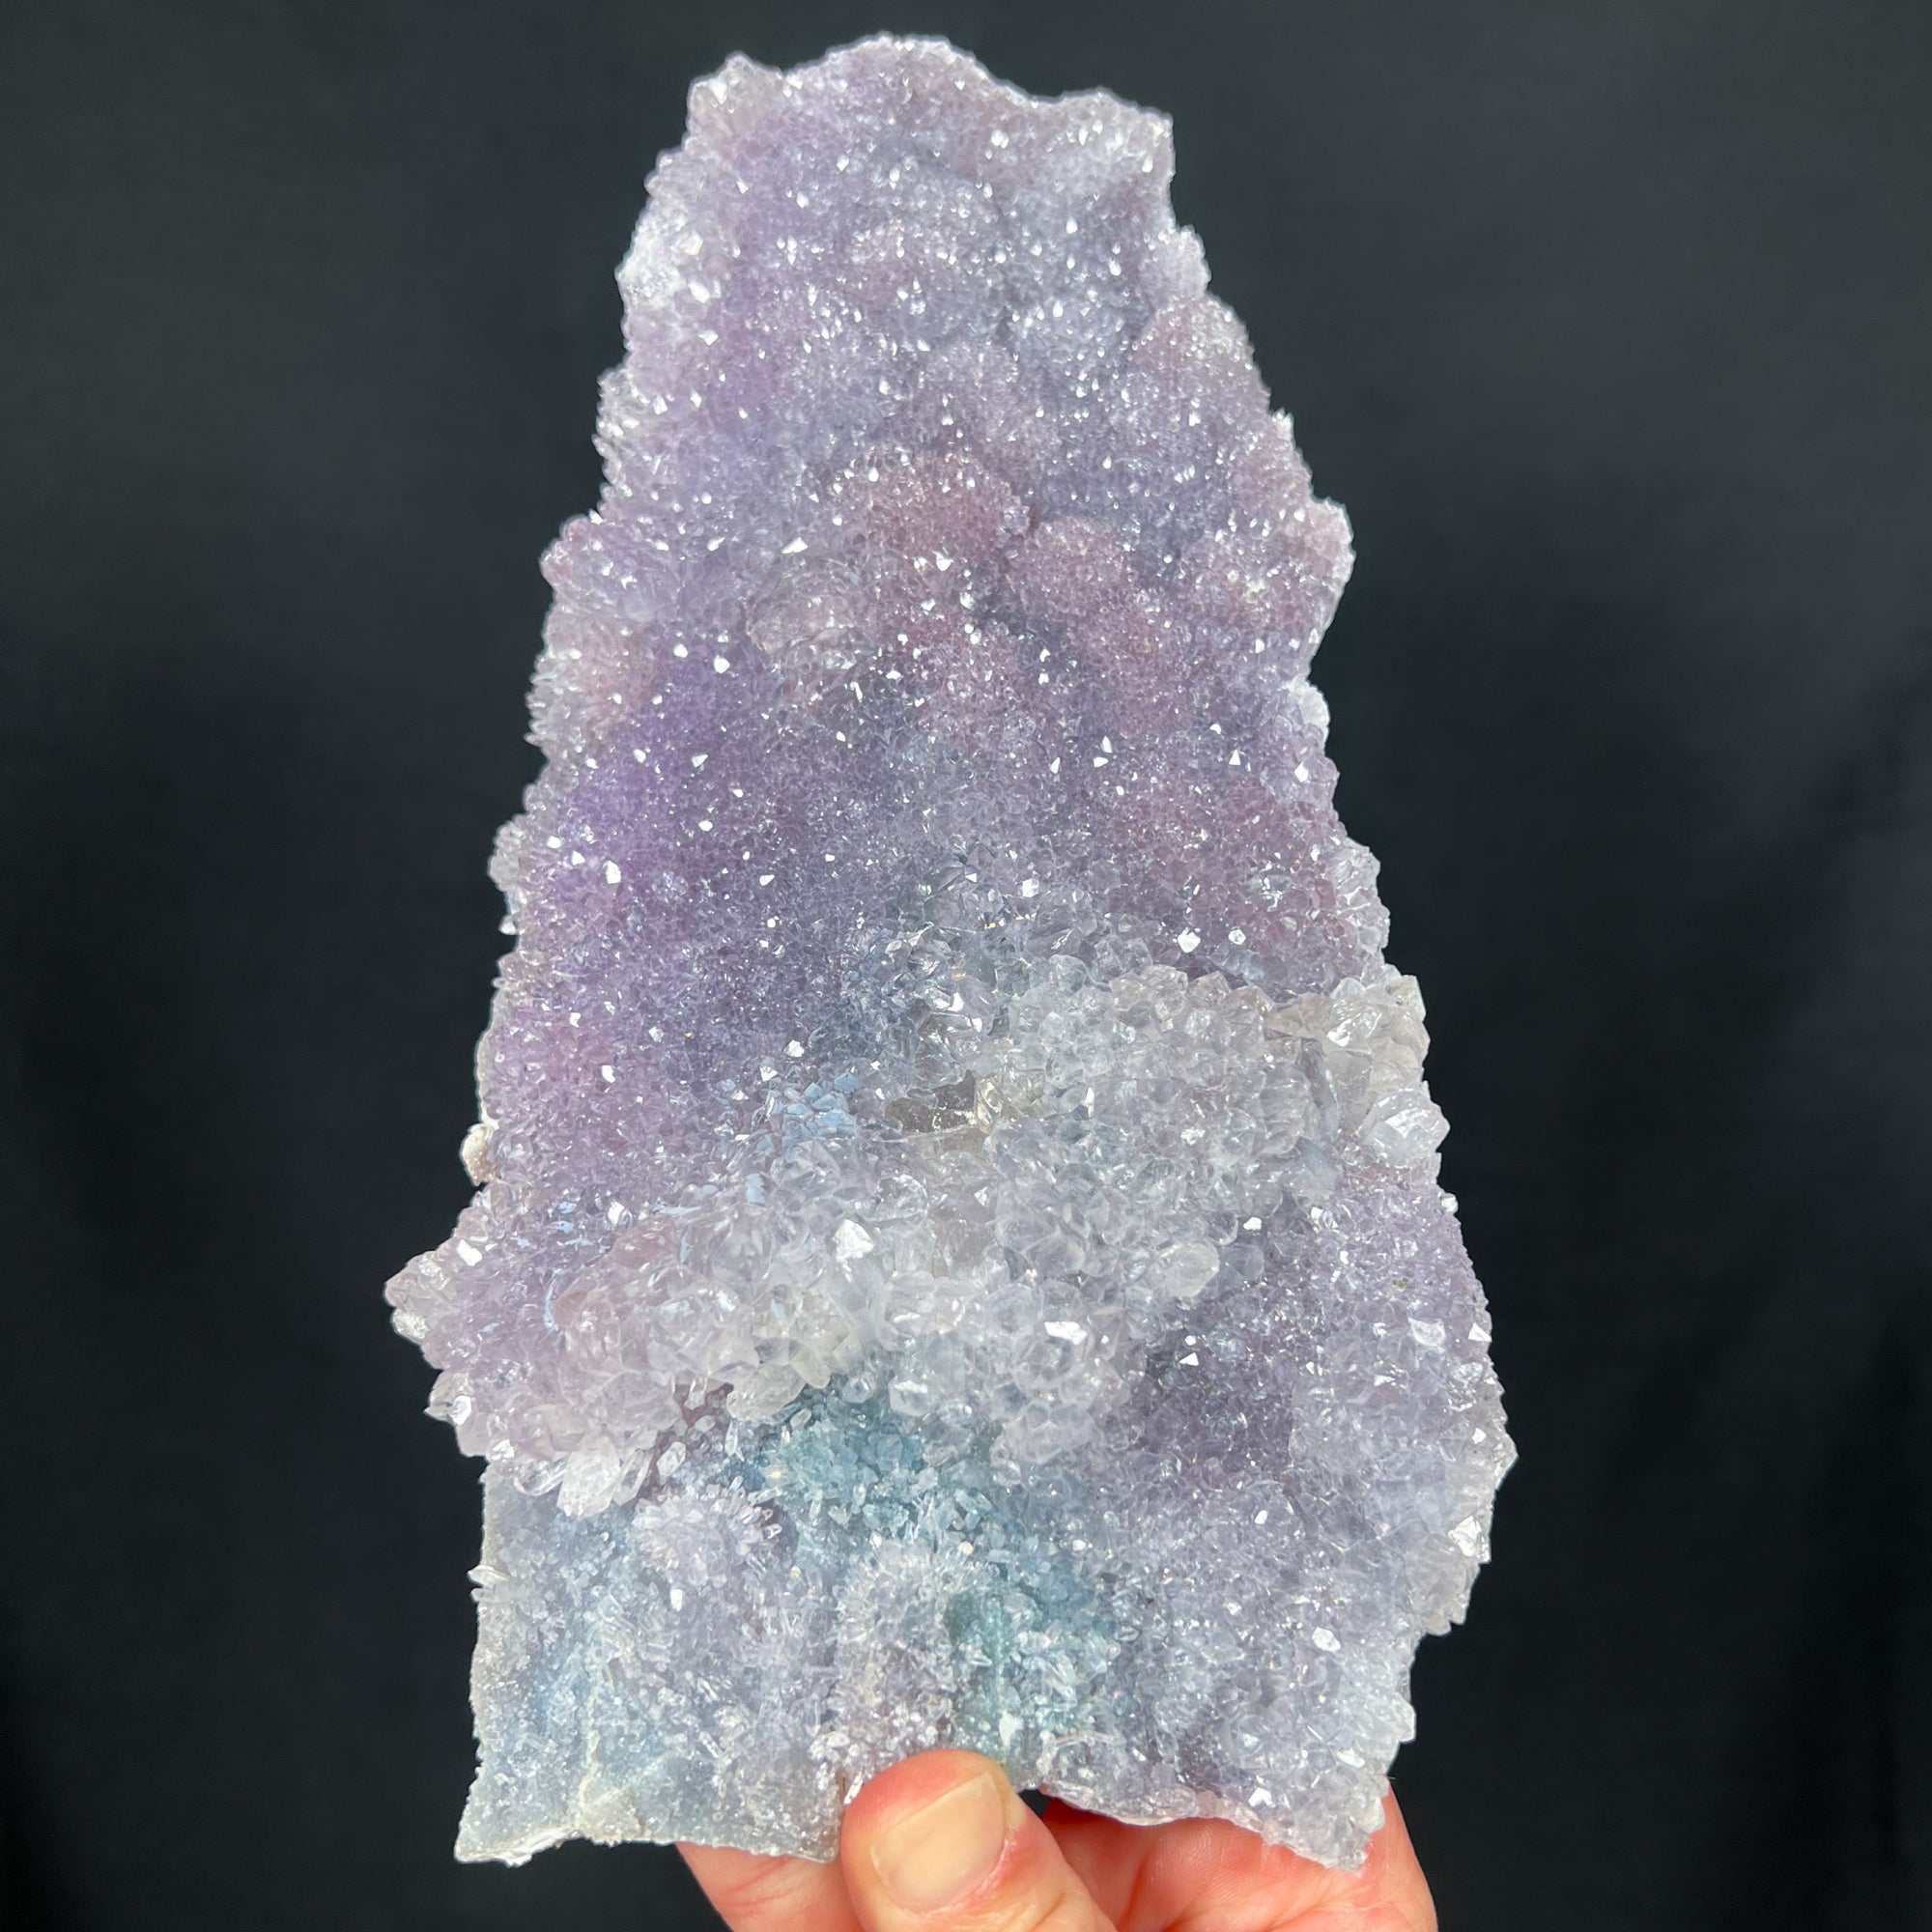 Large Amethyst Stalactite with Quartz and Chalcedony